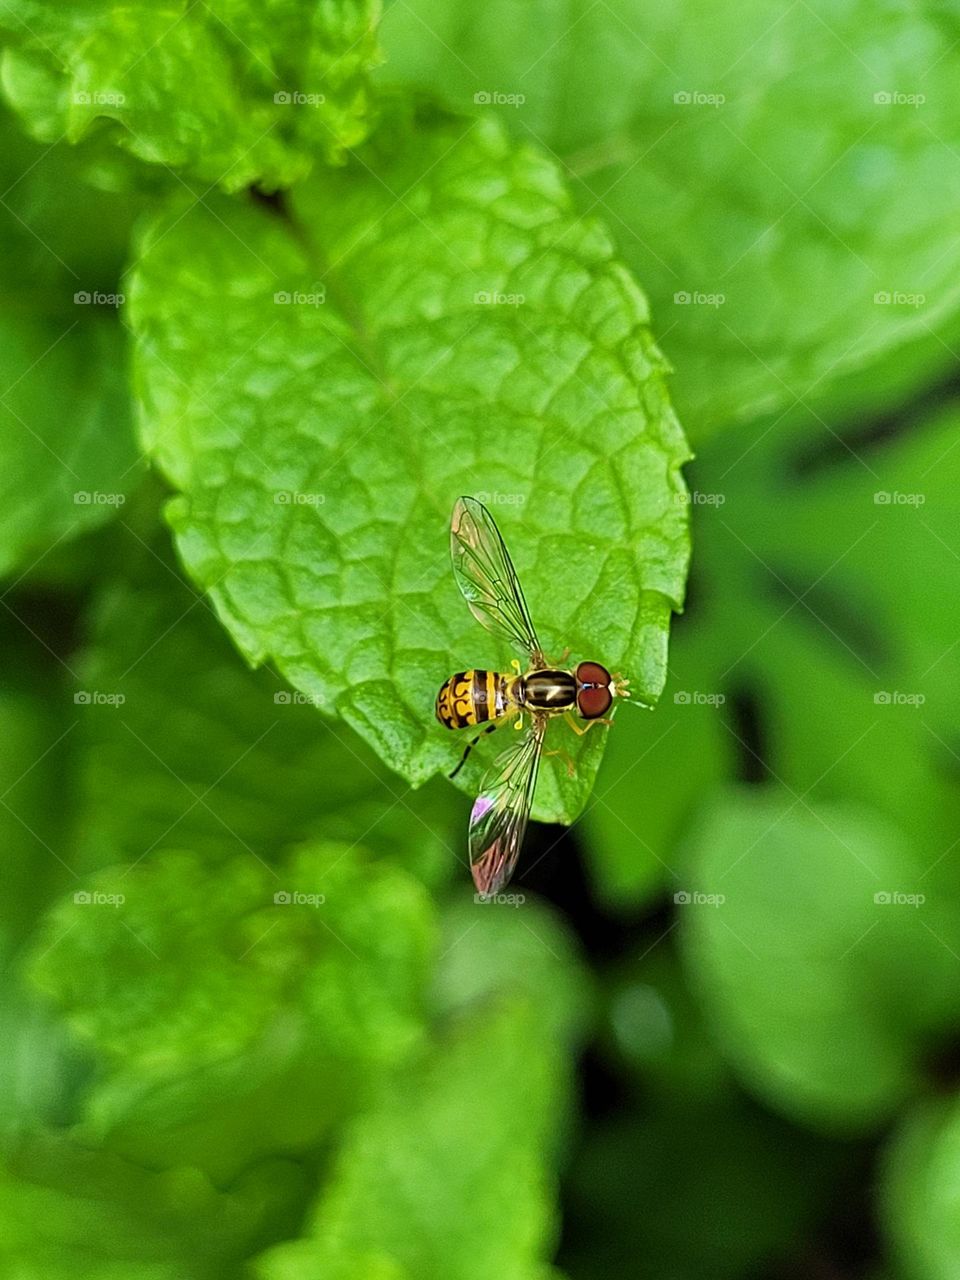 a mosquito perched on the mint